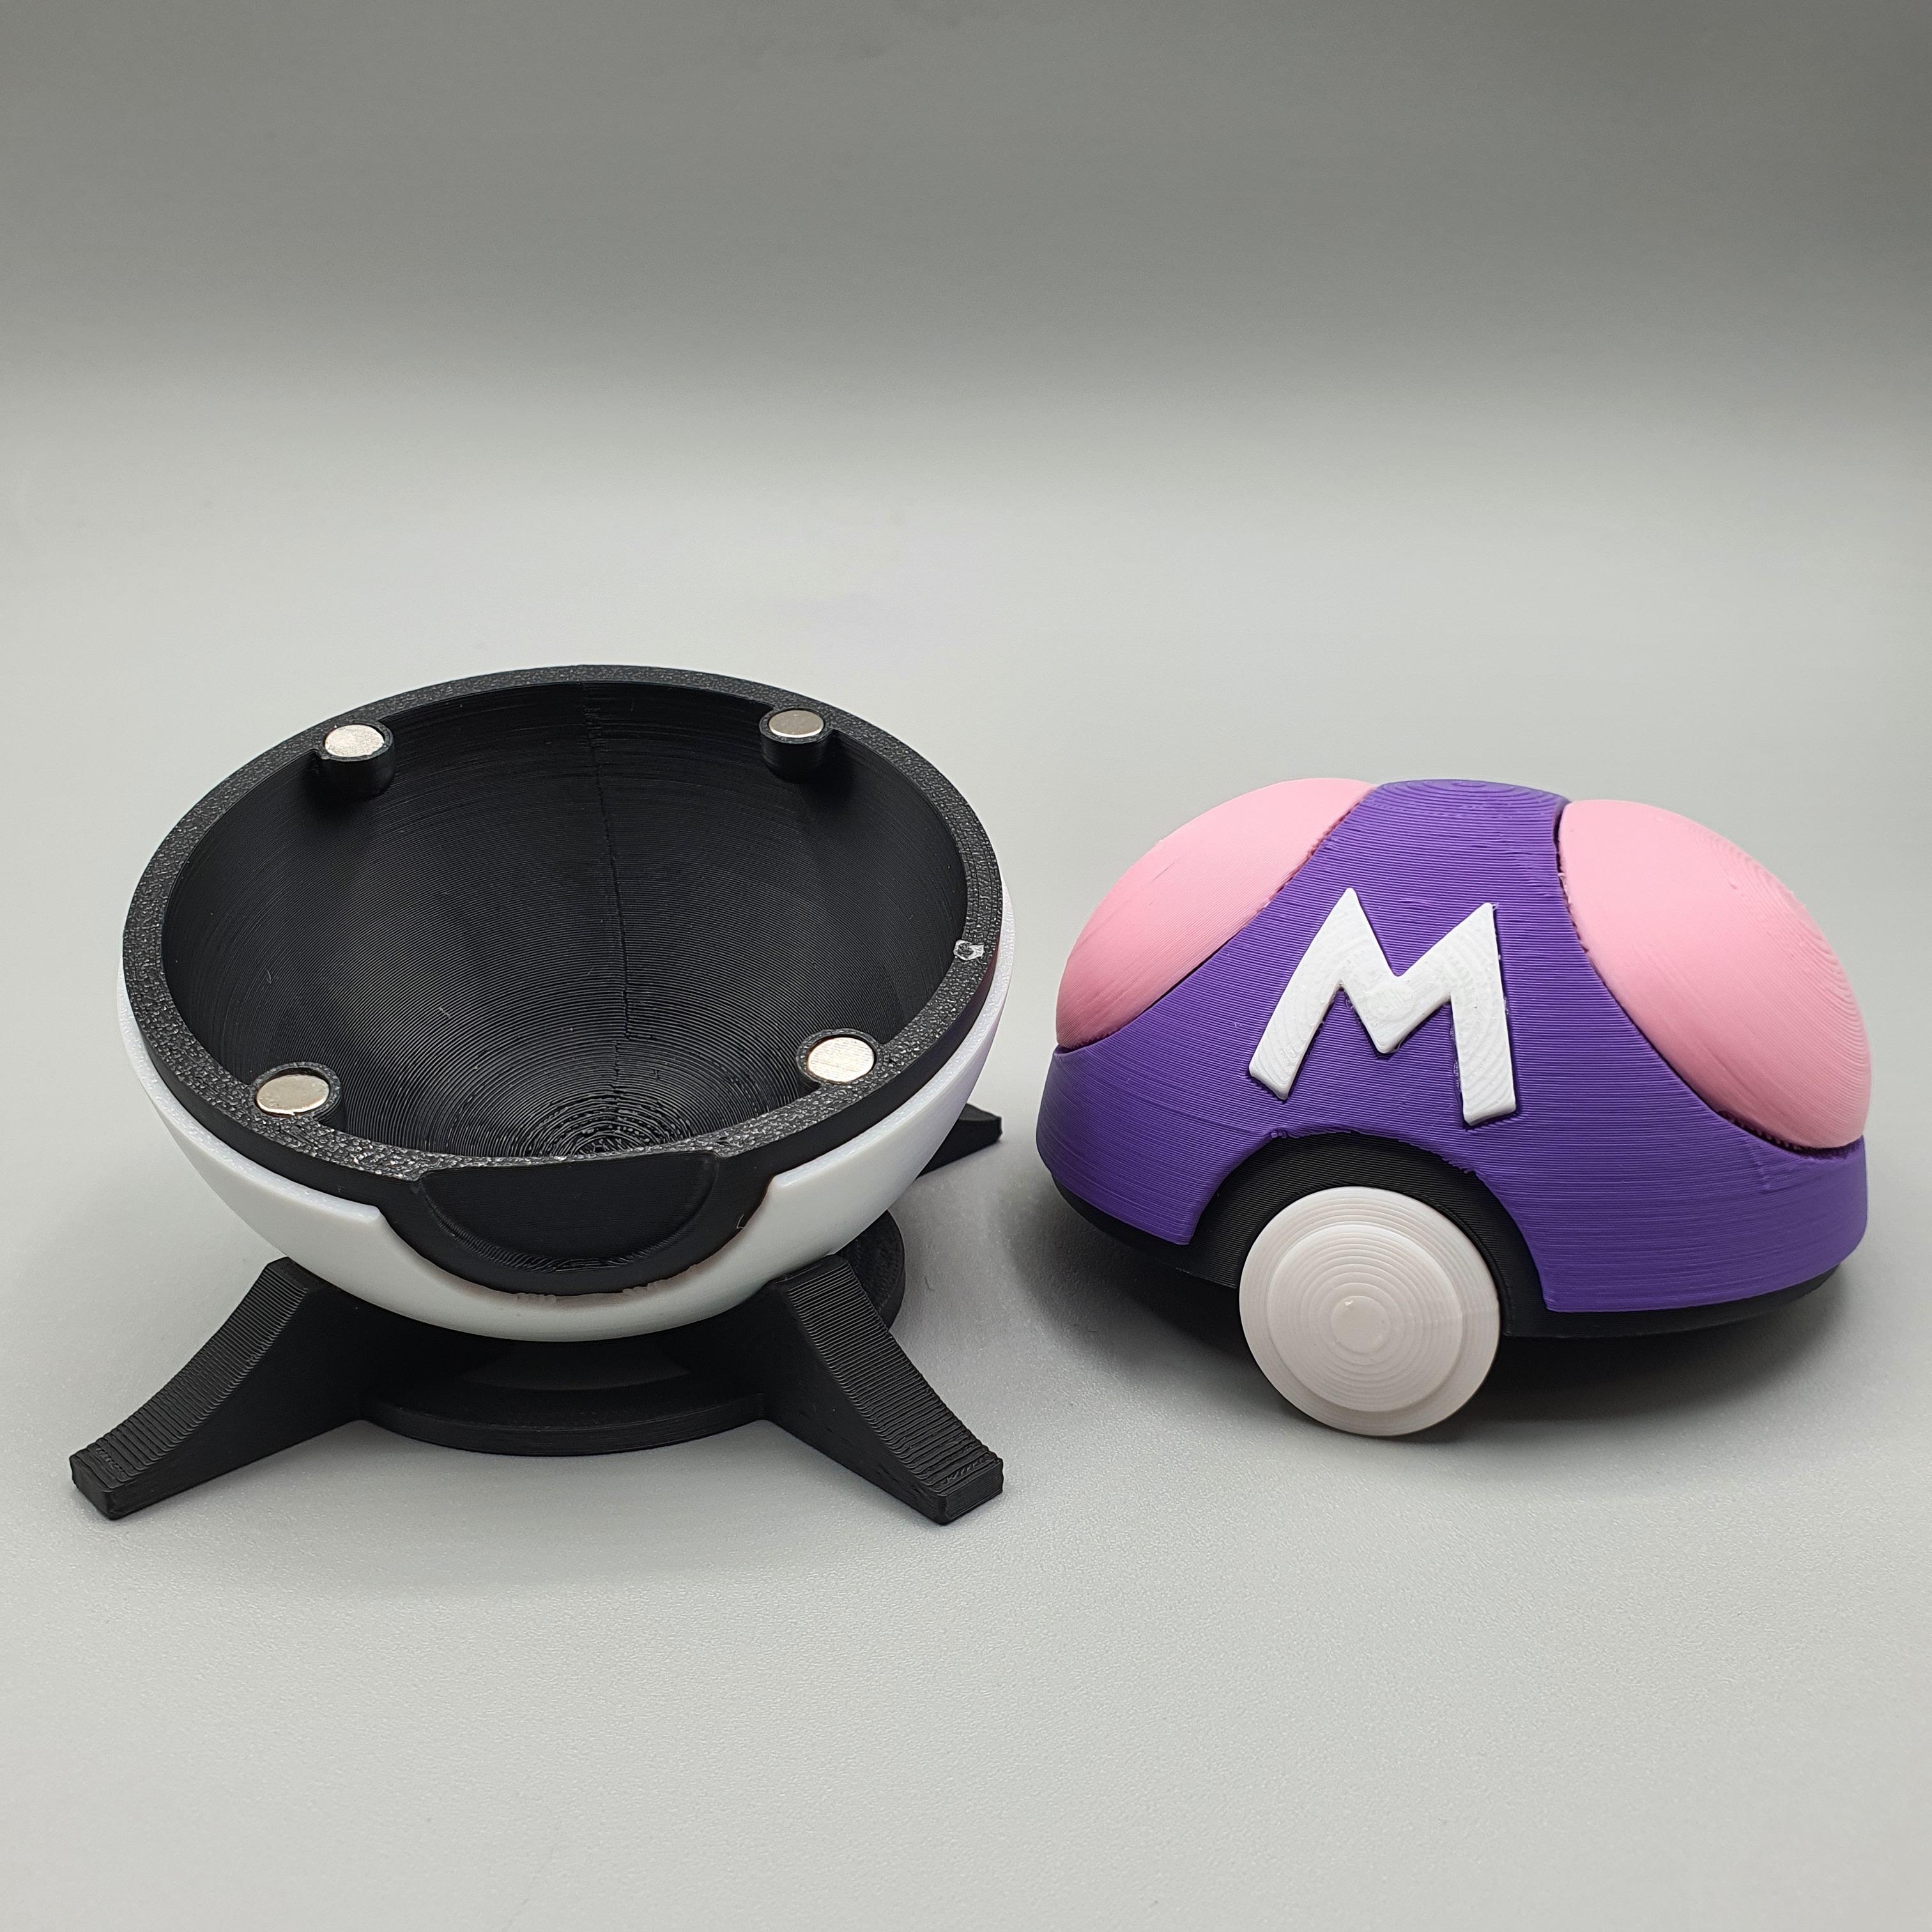 POKEMON MASTER BALL CONTAINER SWAPPABLE 3d model